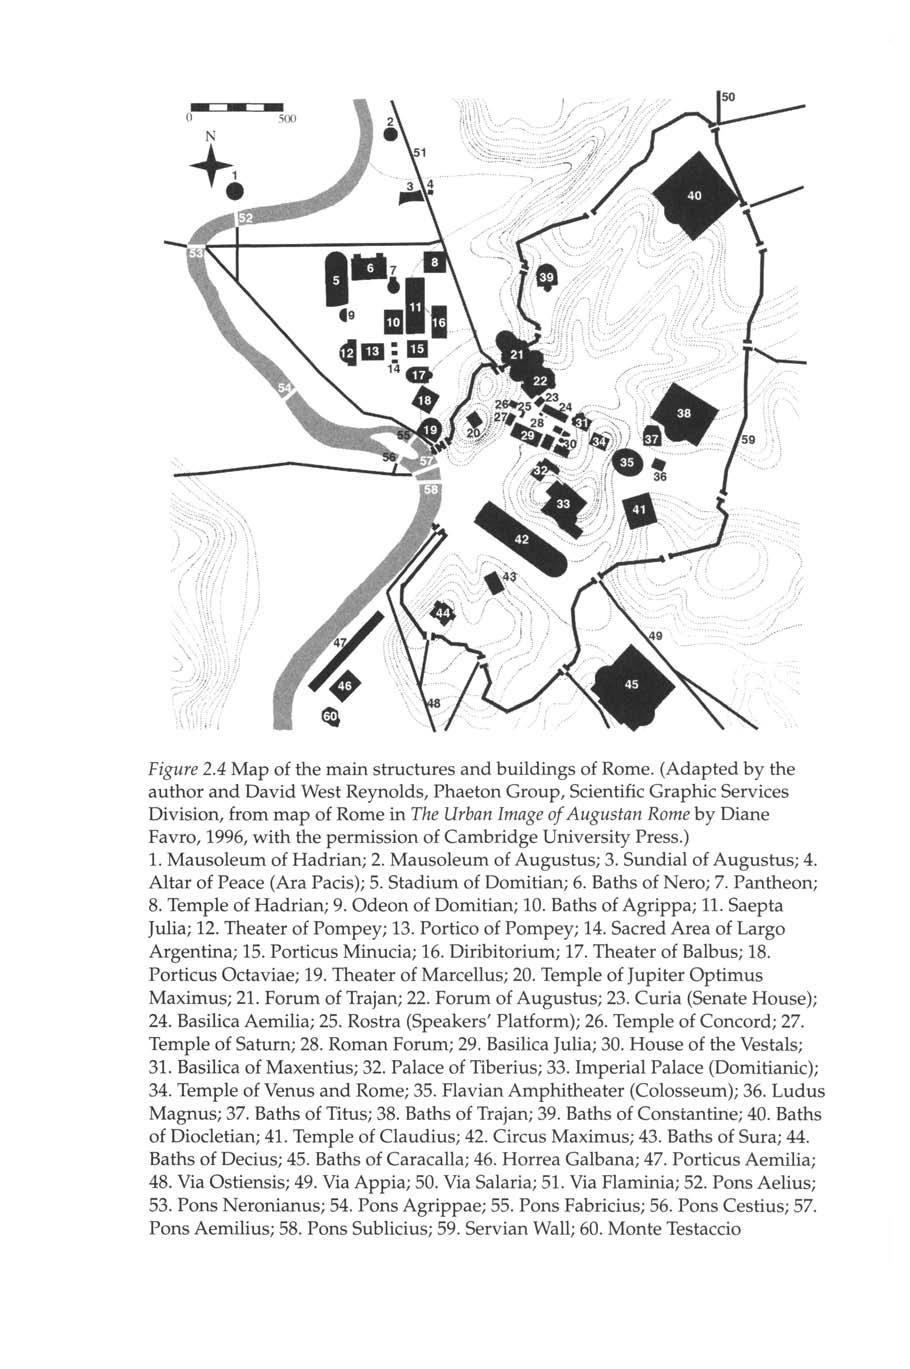 Figure 2.4 Map of the main structures and buildings of Rome.